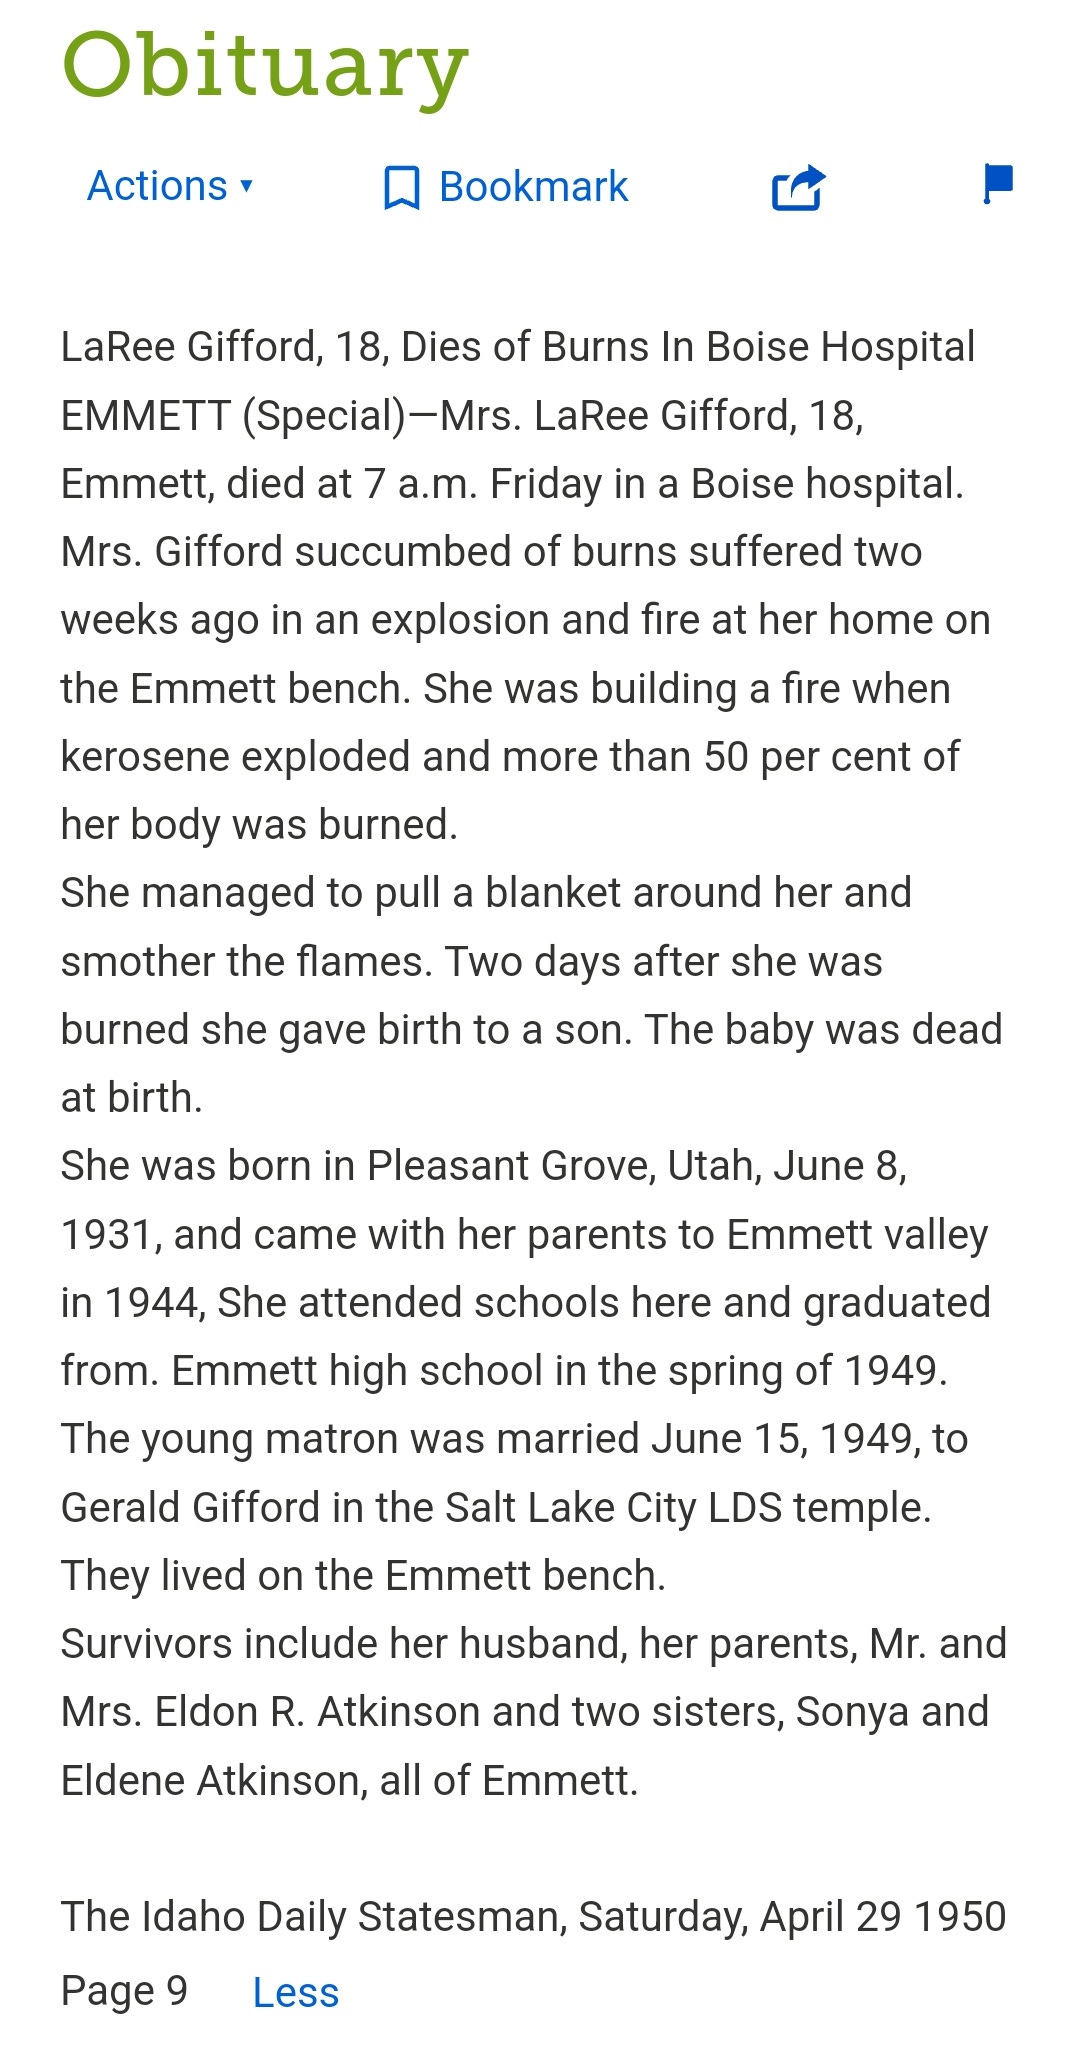 LaRee Gifford, 18, Dies of Burns In Boise Hospital EMMETT (Special)-Mrs. LaRee Gifford, 18, Emmett, died at 7 a.m. Friday in a Boise hospital. Mrs. Gifford succumbed of burns suffered two weeks ago in an explosion and fire at her home on the Emmett bench. She was building a fire when kerosene exploded and more than 50 per cent of her body was burned.  She managed to pull a blanket around her and smother the flames. Two days after she was burned she gave birth to a son. The baby was dead at birth.  She was born in Pleasant Grove, Utah, June 8, 1931, and came with her parents to Emmett valley in 1944, She attended schools here and graduated from. Emmett high school in the spring of 1949. The young matron was married June 15, 1949, to Gerald Gifford in the Salt Lake City LDS temple. They lived on the Emmett bench.  Survivors include her husband, her parents, Mr. and Mrs. Eldon R. Atkinson and two sisters, Sonya and Eldene Atkinson, all of Emmett.